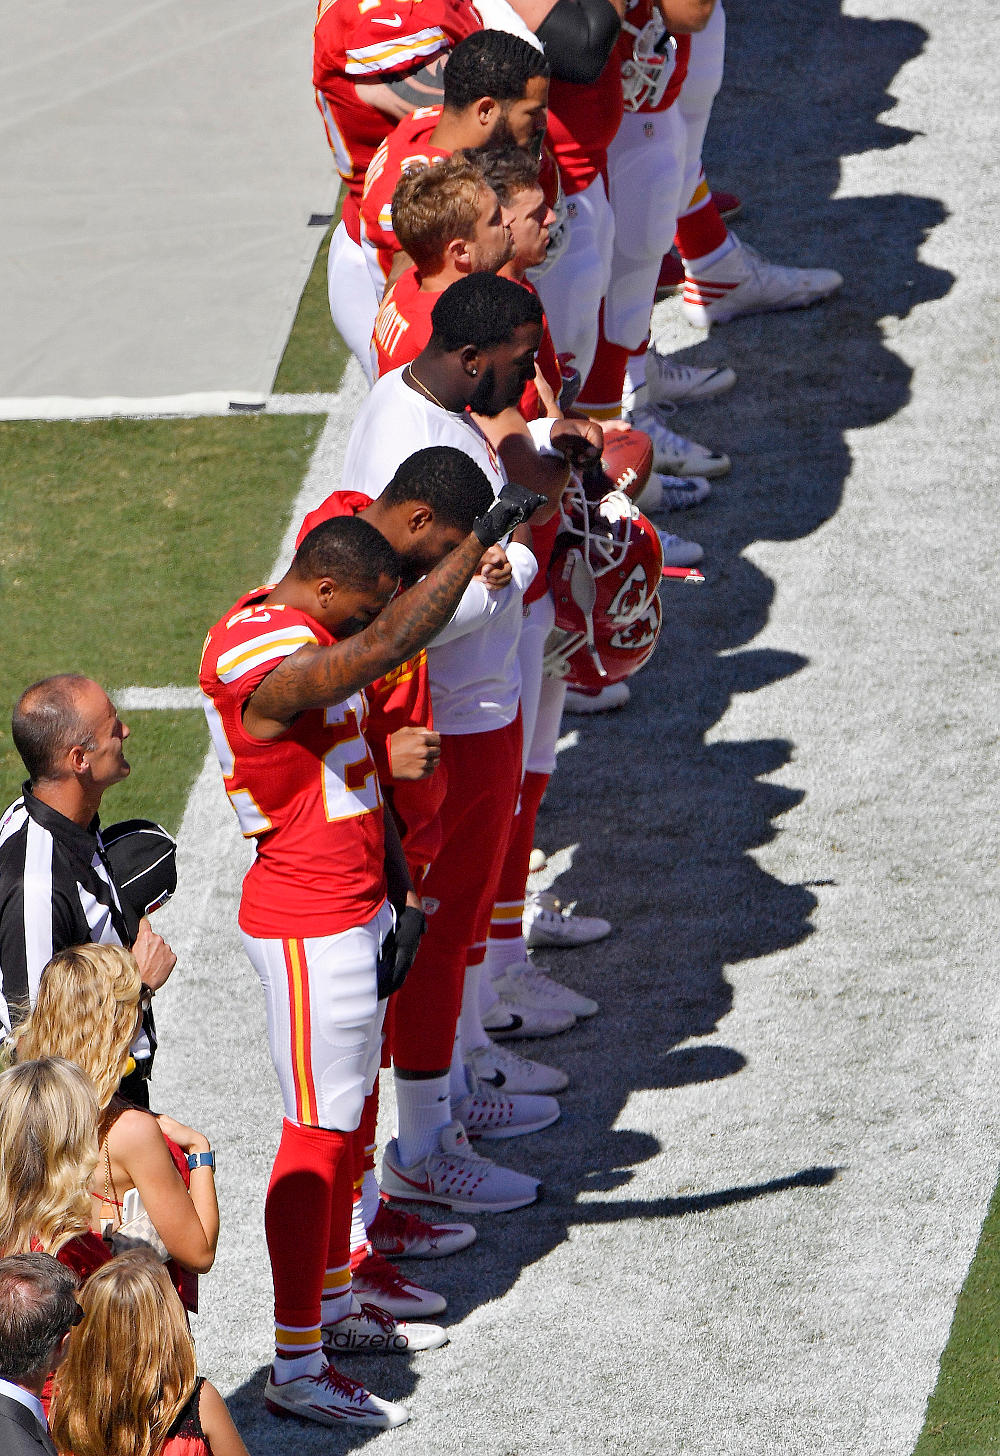 Kansas City Chiefs defensive back Marcus Peters raises his fist in the air as the National Anthem plays before Sunday's football game against the San Diego Chargers on September 11, 2016 at Arrowhead Stadium in Kansas City, Mo.